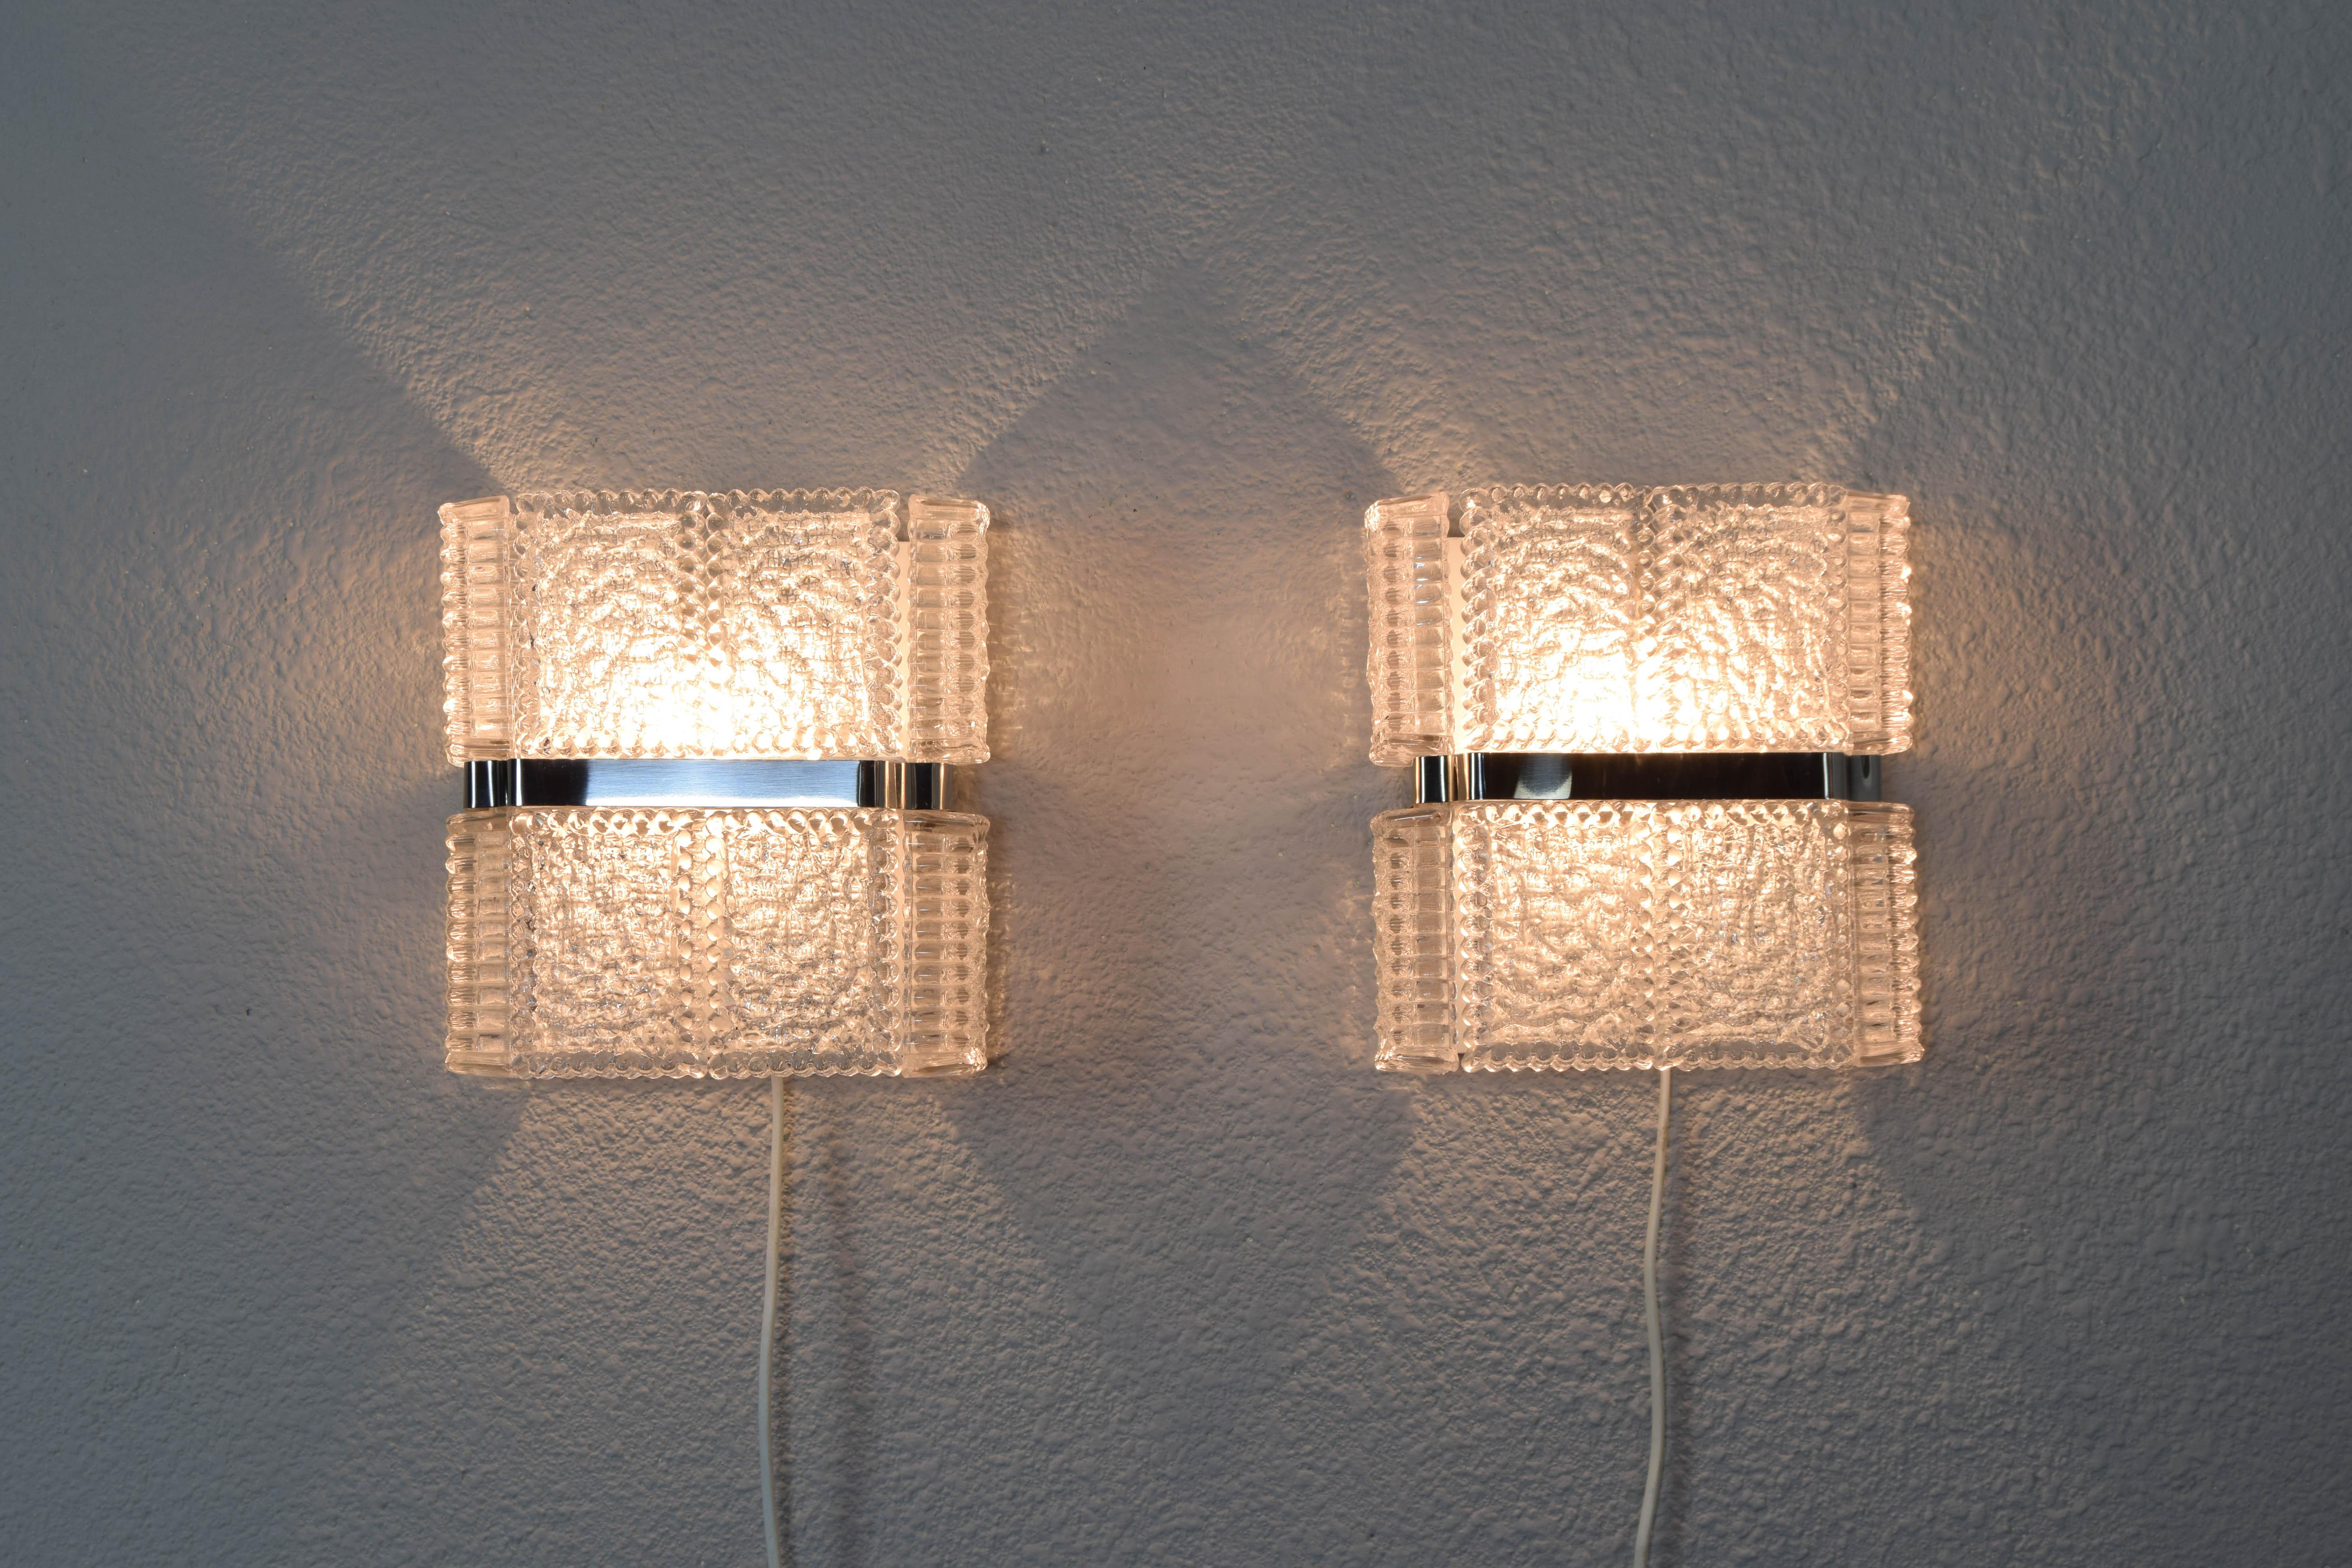 Mid-Century Modern chandelier and sconces made by Kaiser Leuchen, Germany in the 1960s.
Body of the ceiling lamp made up of 12 textured solid crystal blocks that are distributed 6 in the upper part of the lamp and 6 in the lower part and these in